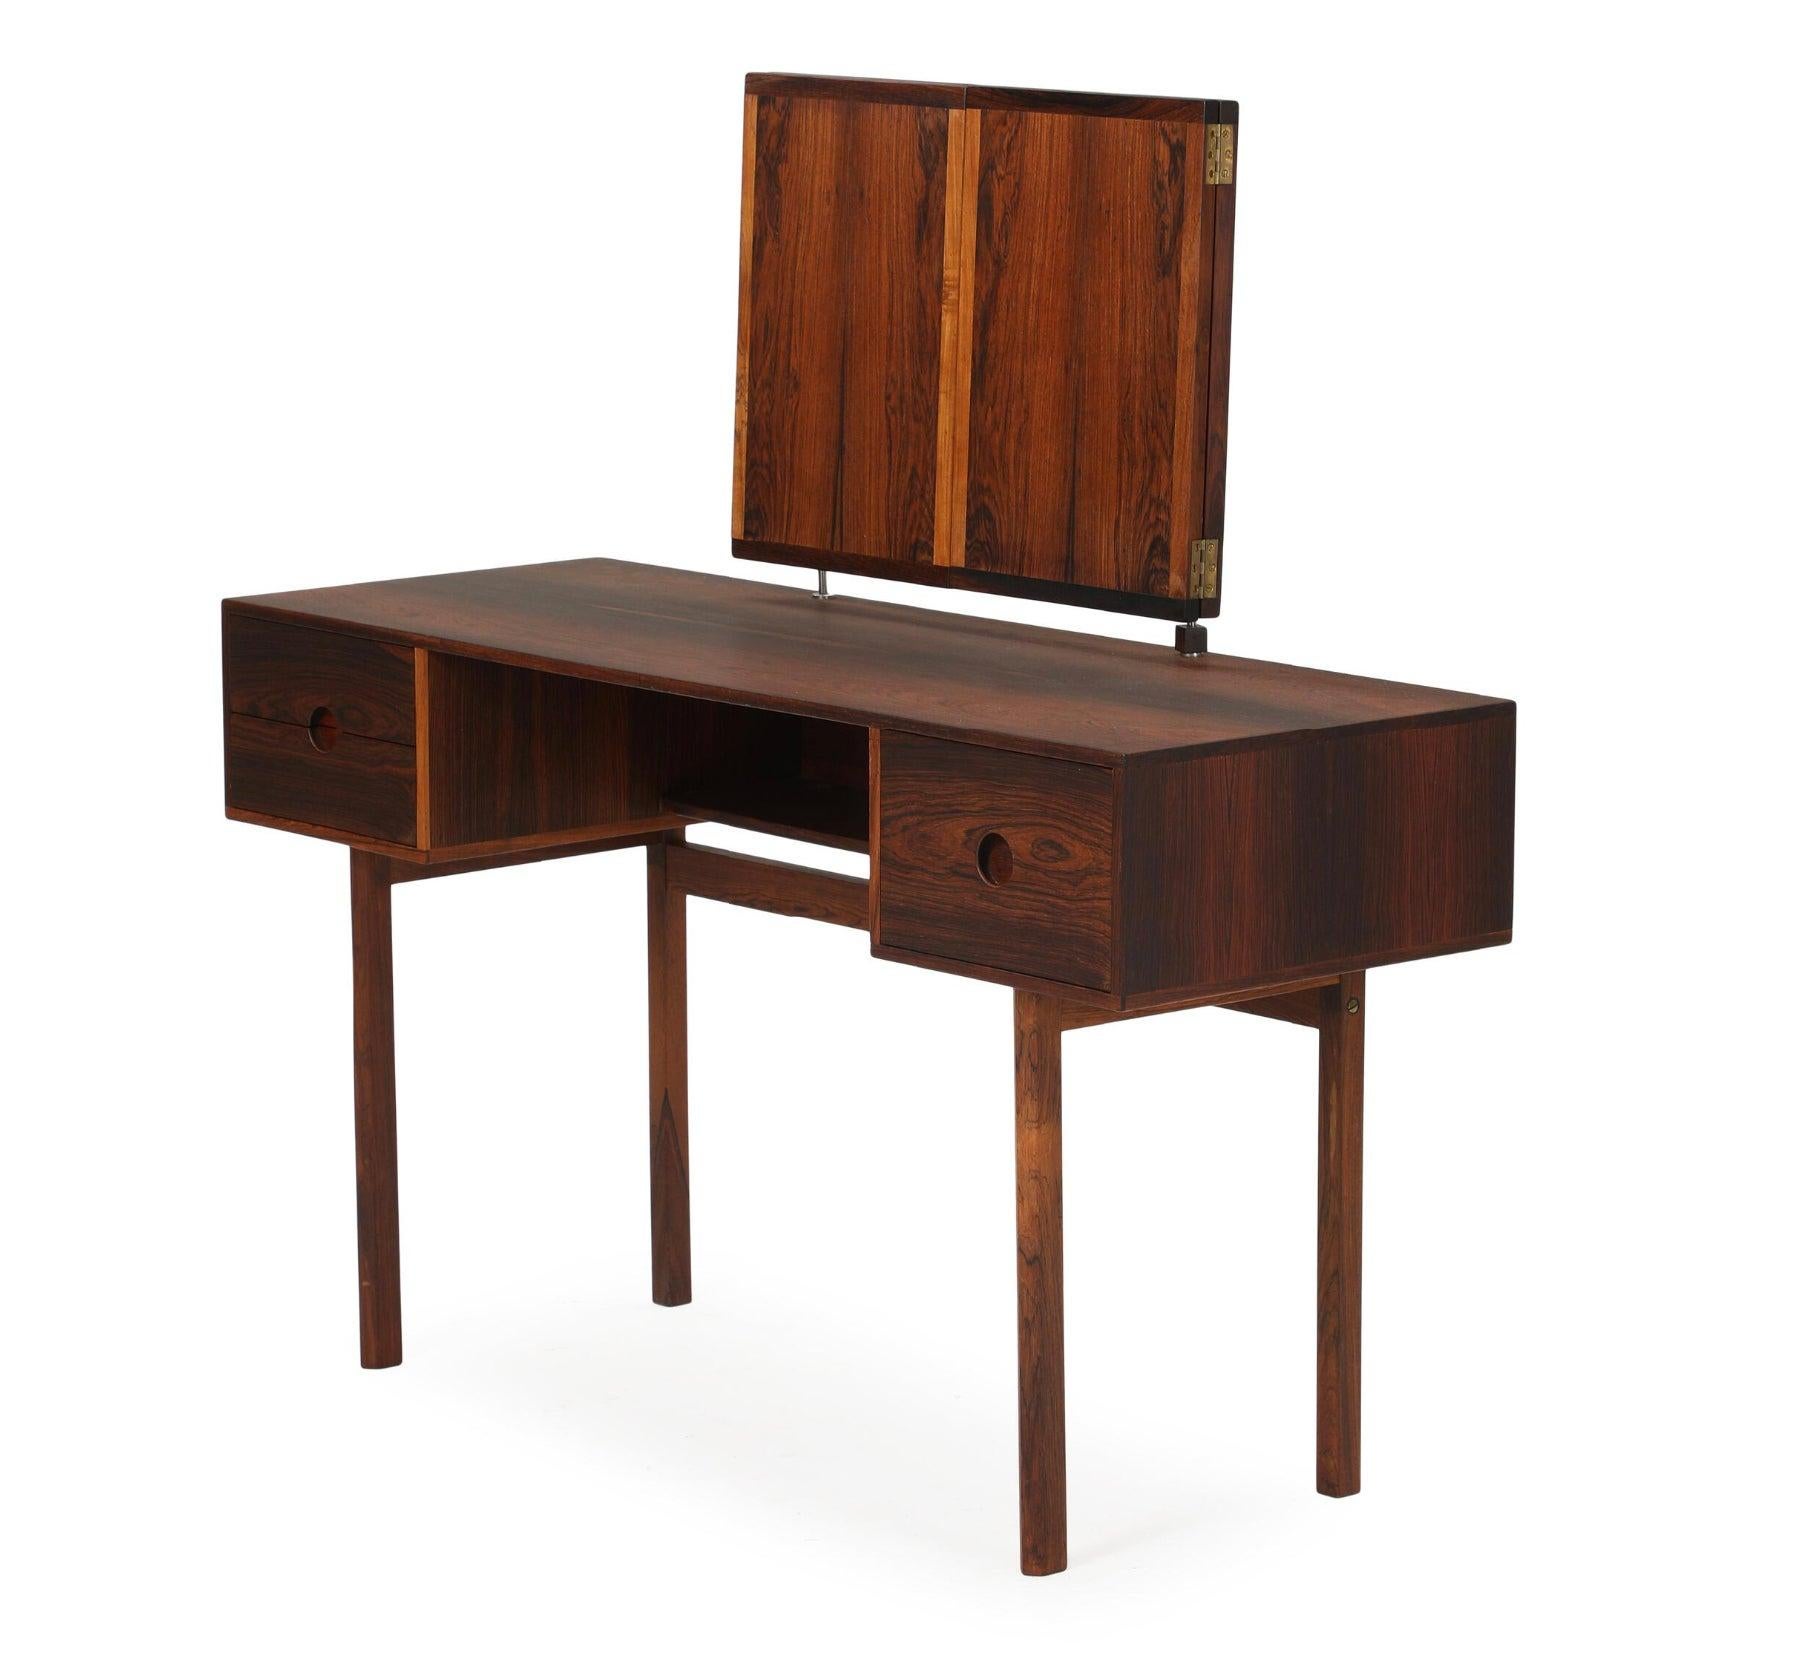 Kai Kristiansen Model 40 Rosewood Dressing table with folding 3-piece mirror. This dressing table was made from highly figured exotic rosewood by Aksel Kjersgaard in Denmark. Matching stool available by request. Pictured in a good pre-restoration